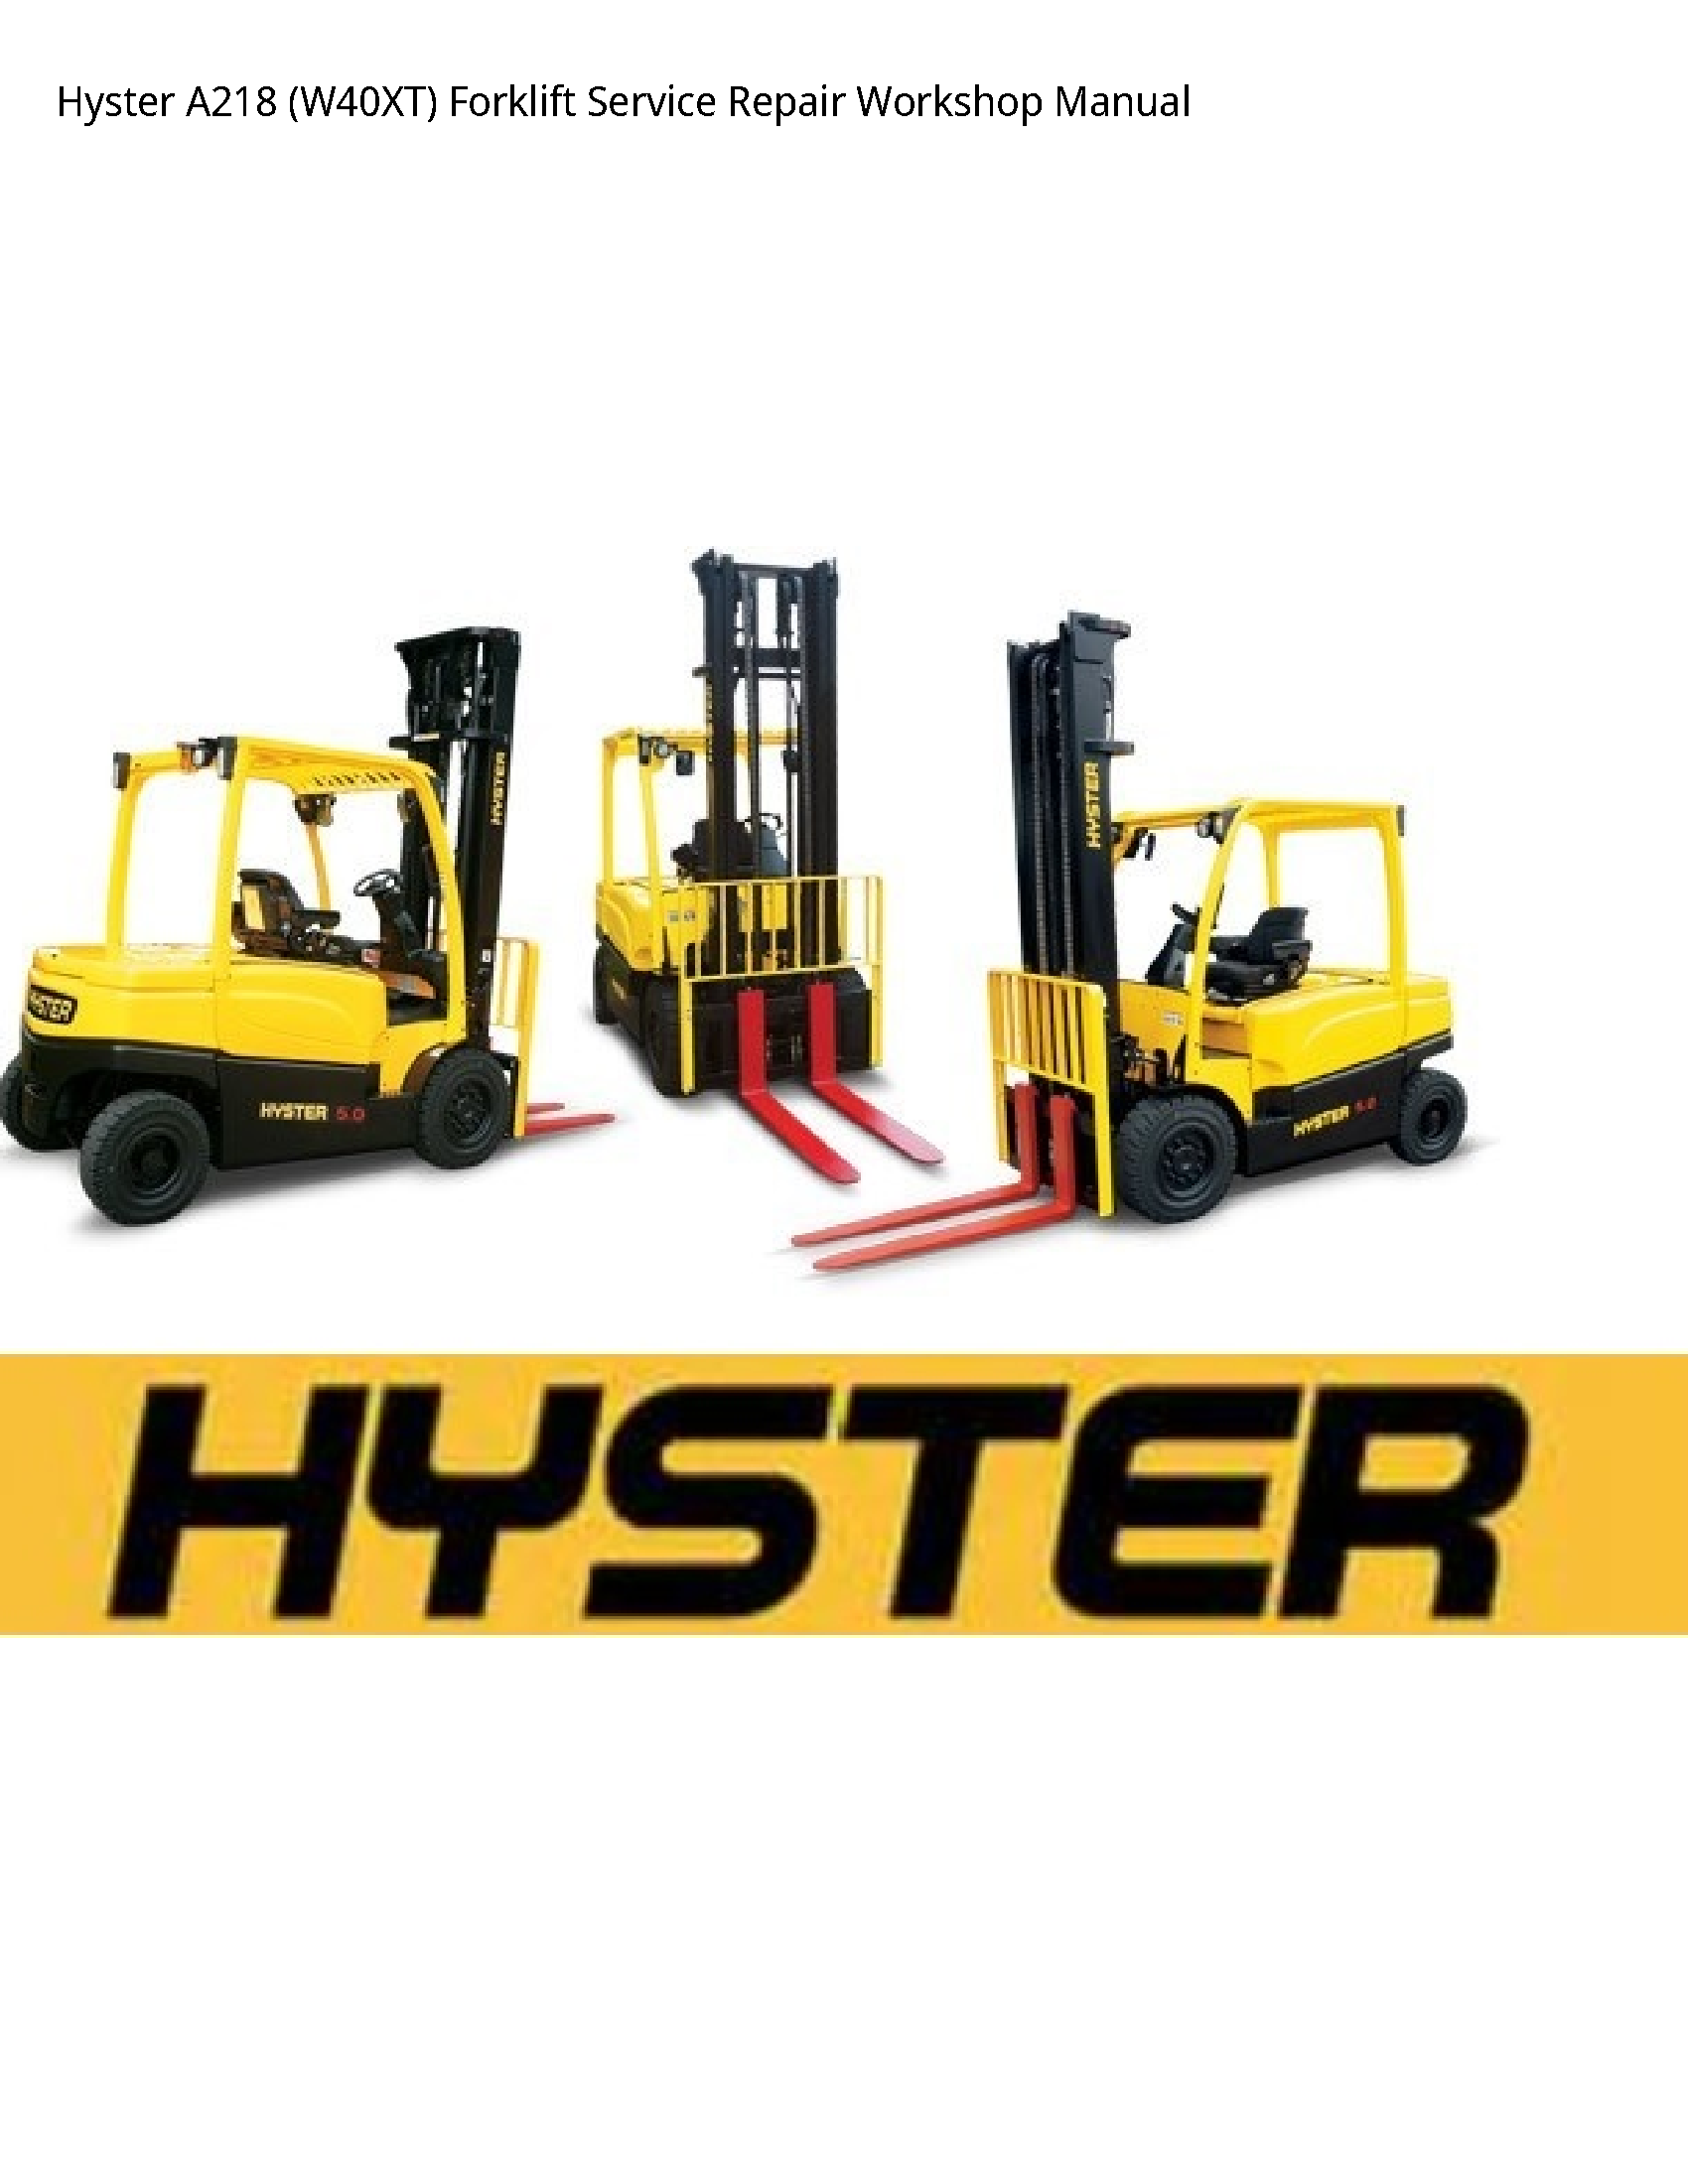 Hyster A218 Forklift manual